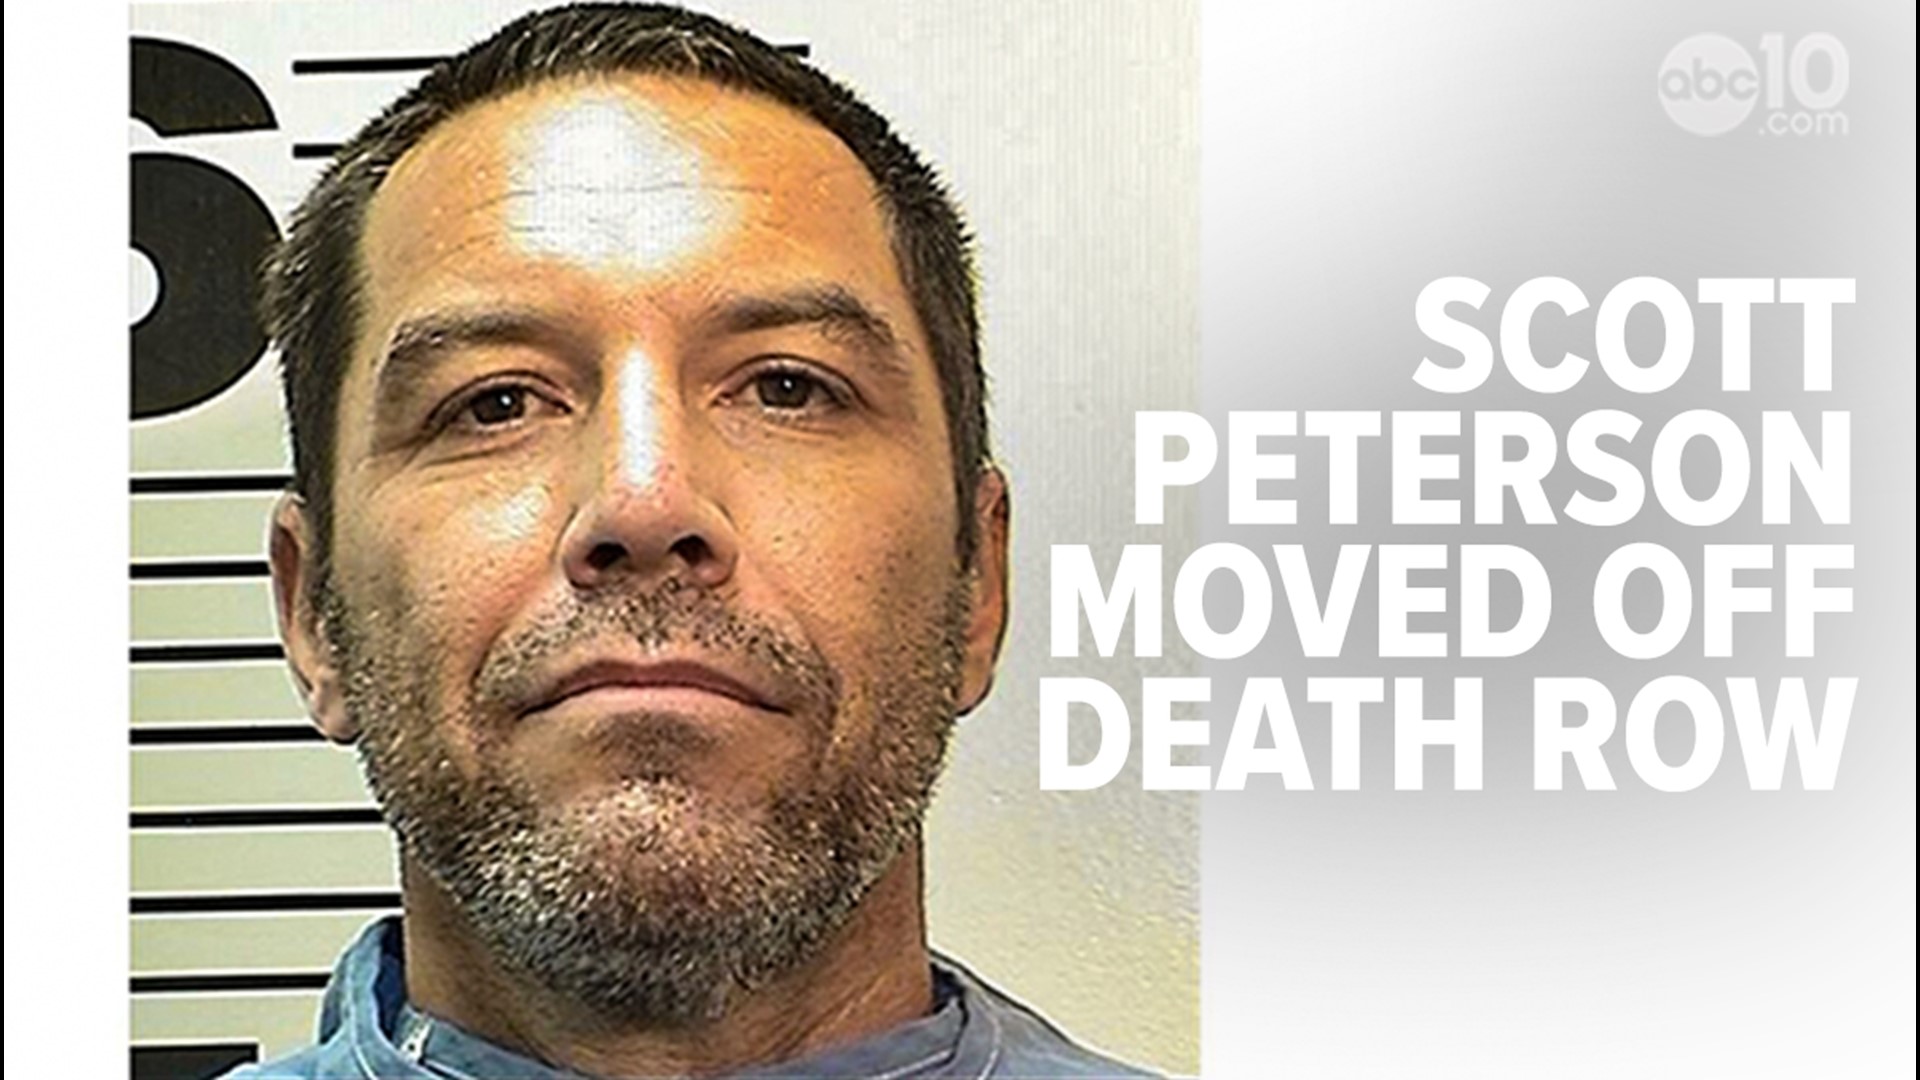 Scott Peterson was moved last week from San Quentin State Prison north of San Francisco to Mule Creek State Prison east of Sacramento.